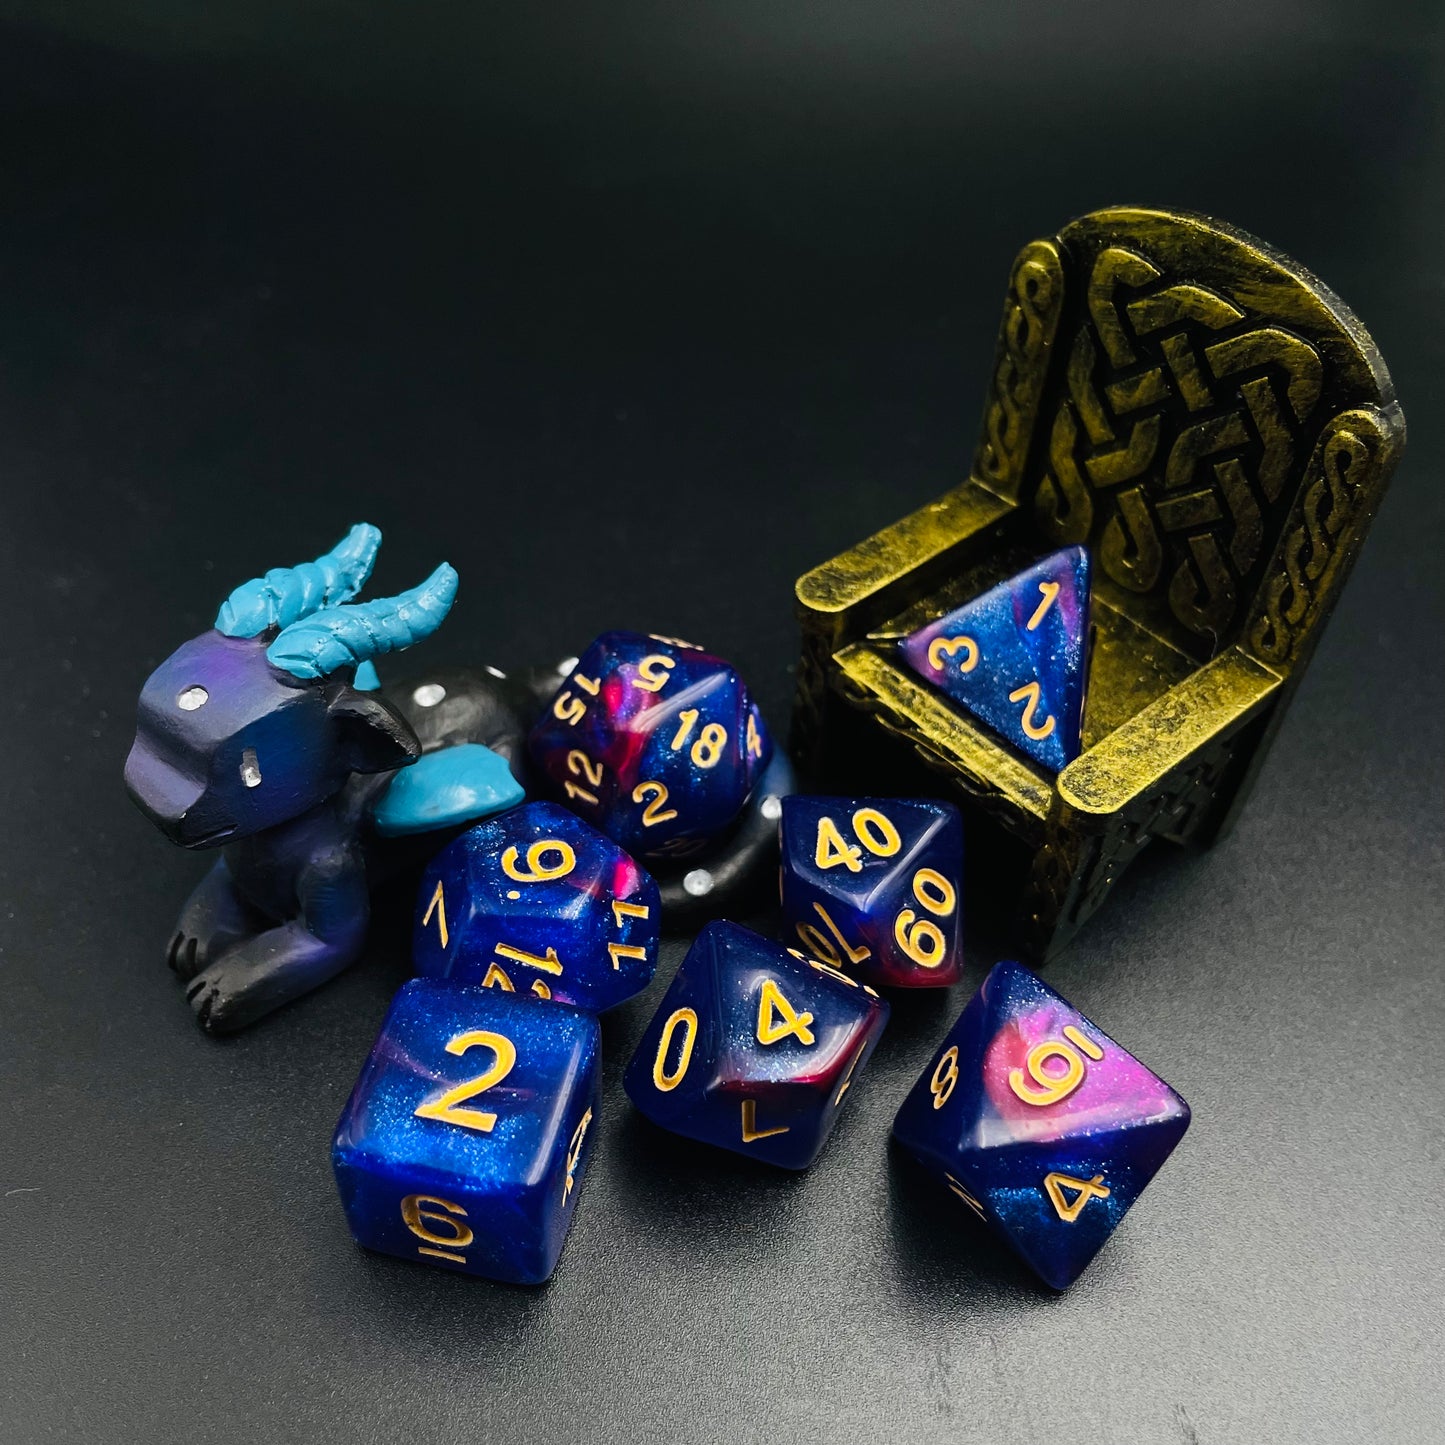 FREE Today: Astral Plane DnD Dice Set | Red Blue Swirling Galaxy